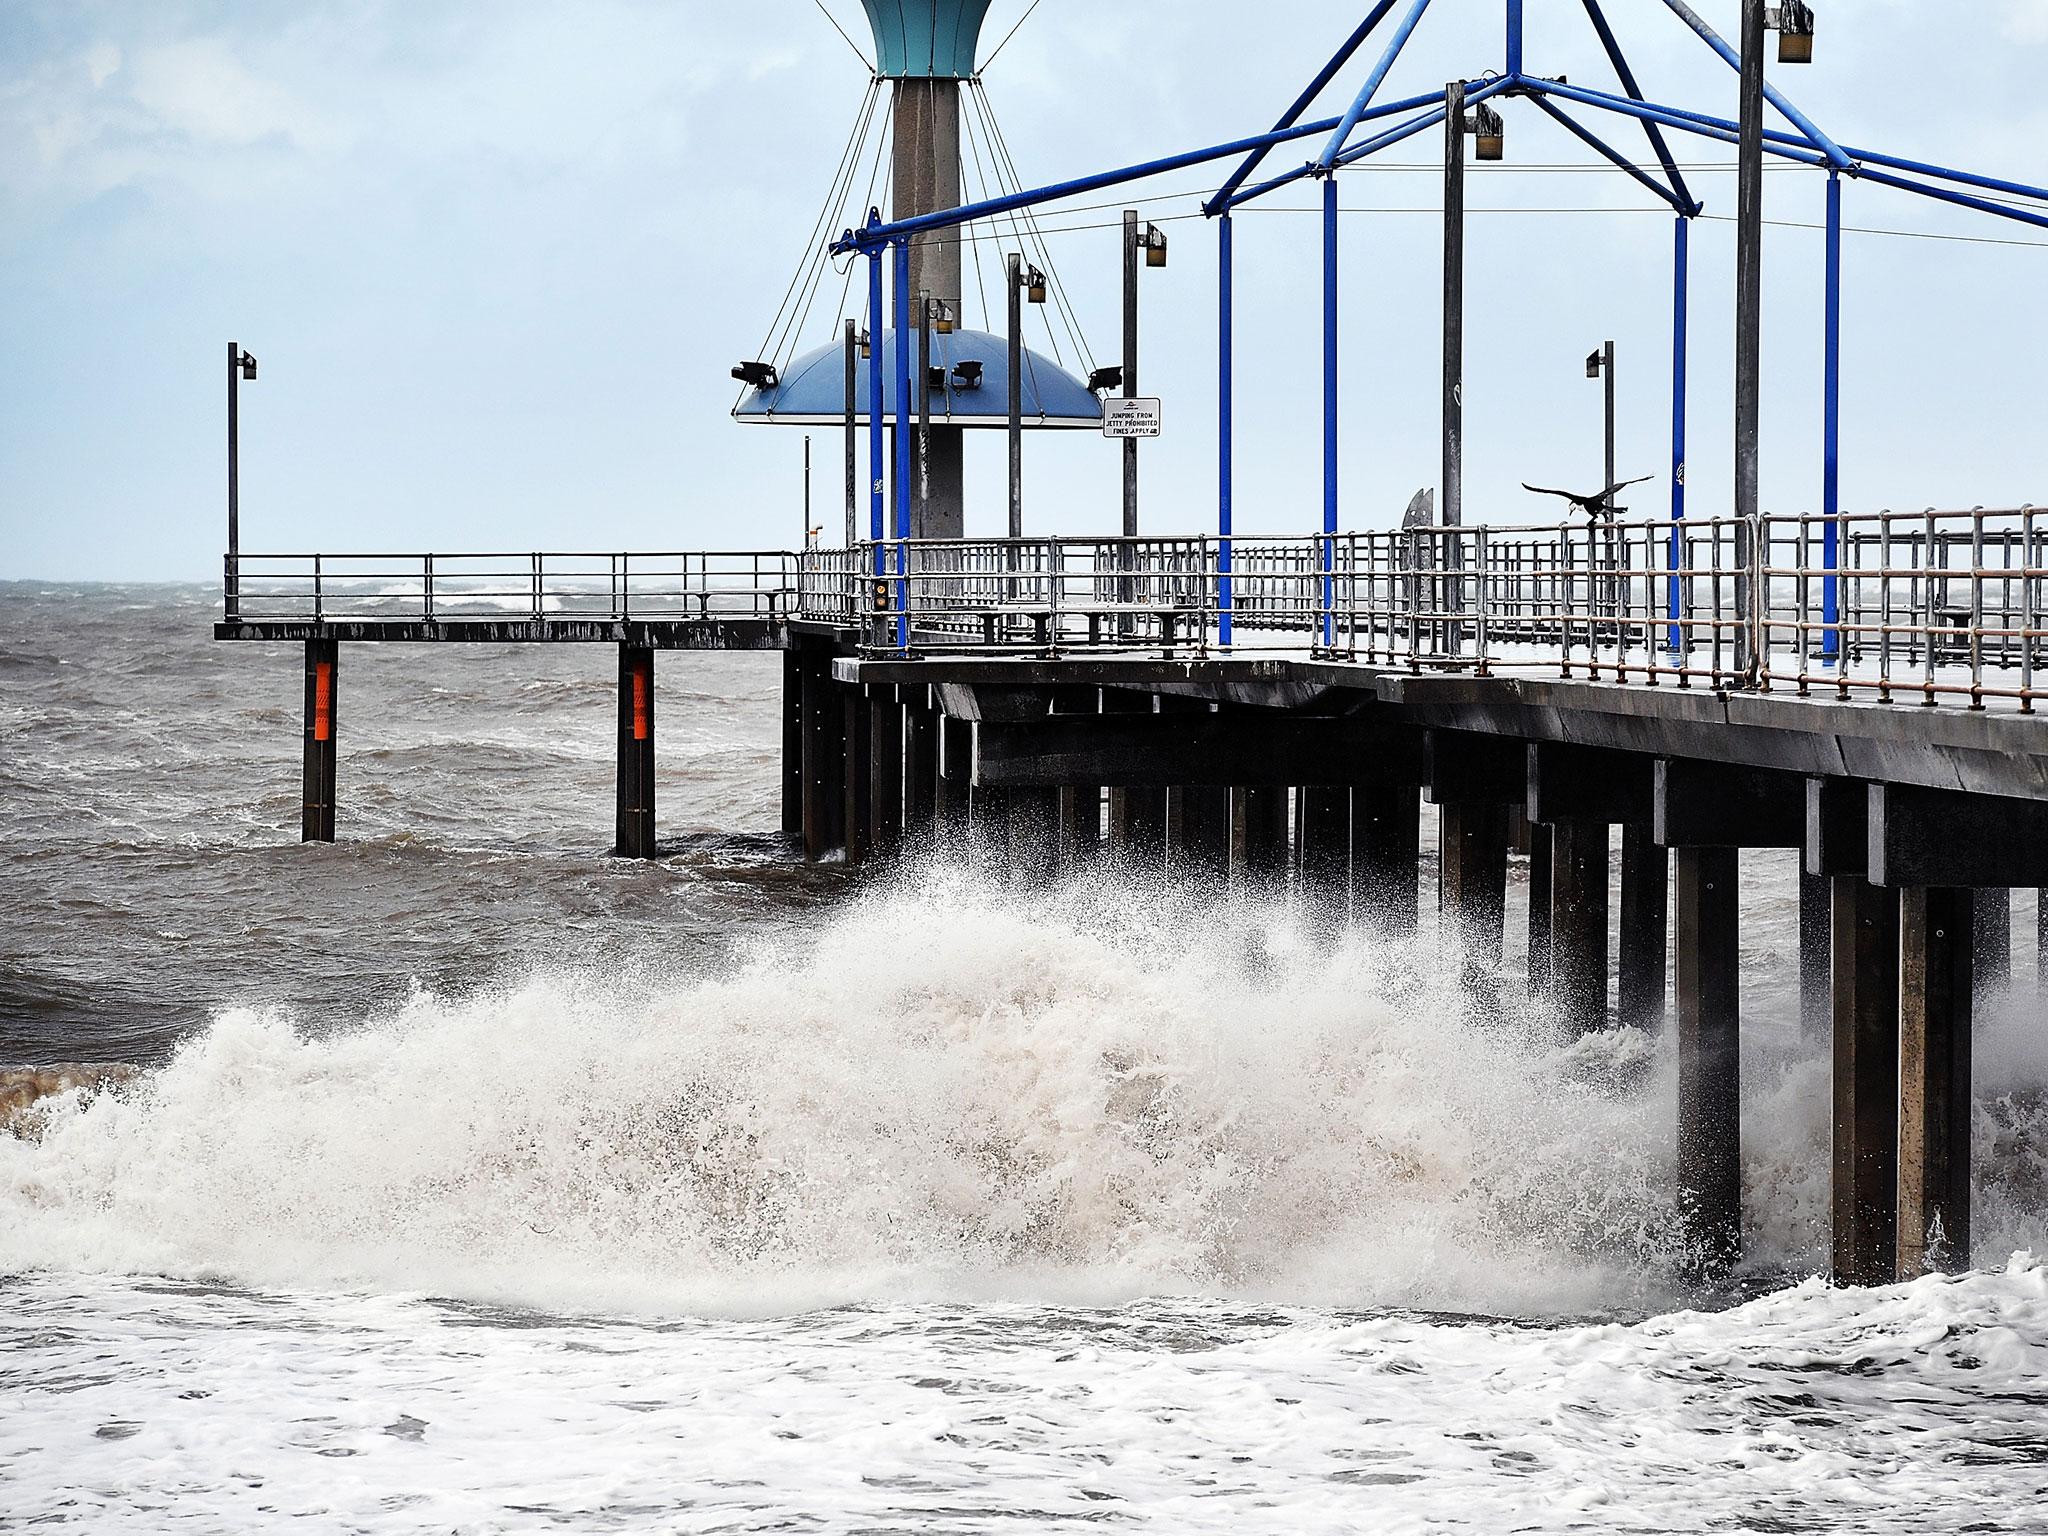 Waves crash into the Brighton Jetty on September 29 in Adelaide, Australia. South Australia was plunged into darkness overnight, as the state suffered a complete blackout, following a severe storm.